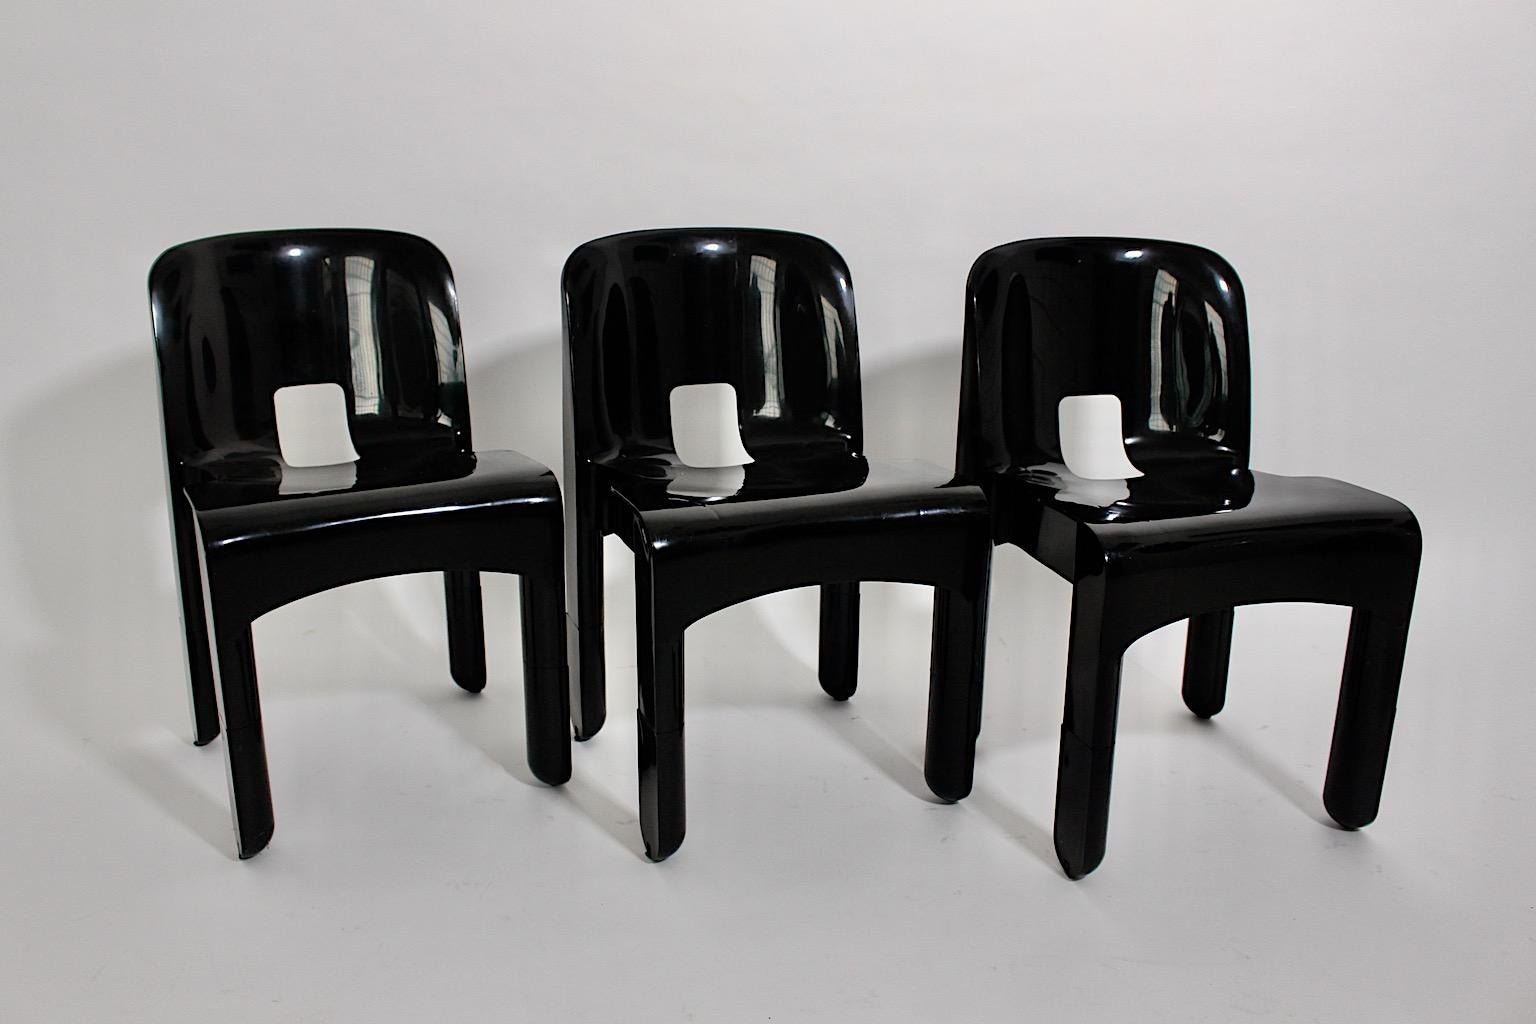 Space Age vintage three plastic dining chairs or chairs by Joe Colombo 1965 - 67 and executed for Kartell 1970s Italy.
Stamped underneath, Kartell Binasco ( Milano ) 860 & 861 made in Italy Des. Prof Joe Colombo 1970
The chairs are in good